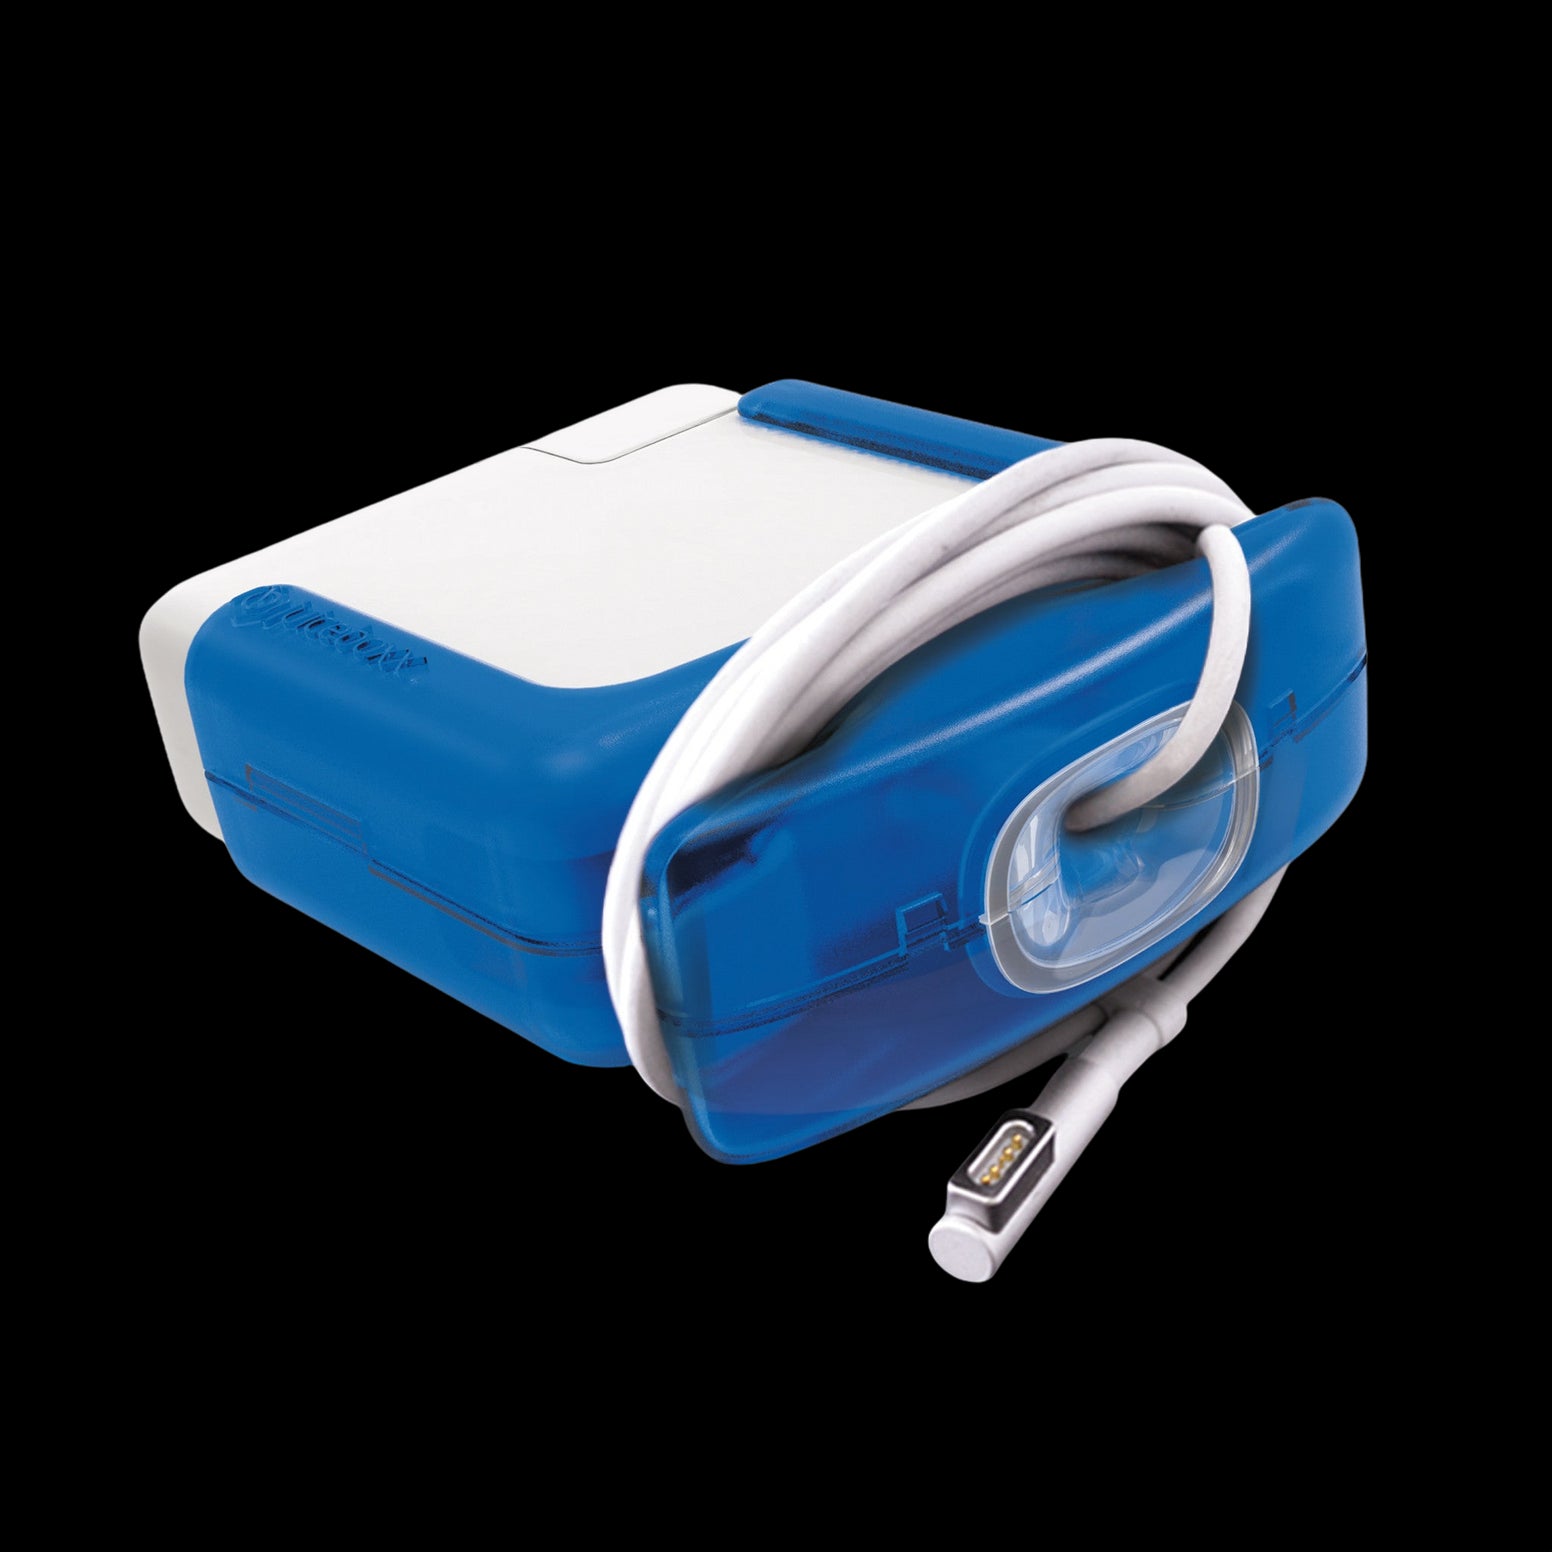 Juiceboxx Charger Case (for 45w Apple Power Adapter/Charger) - Blue